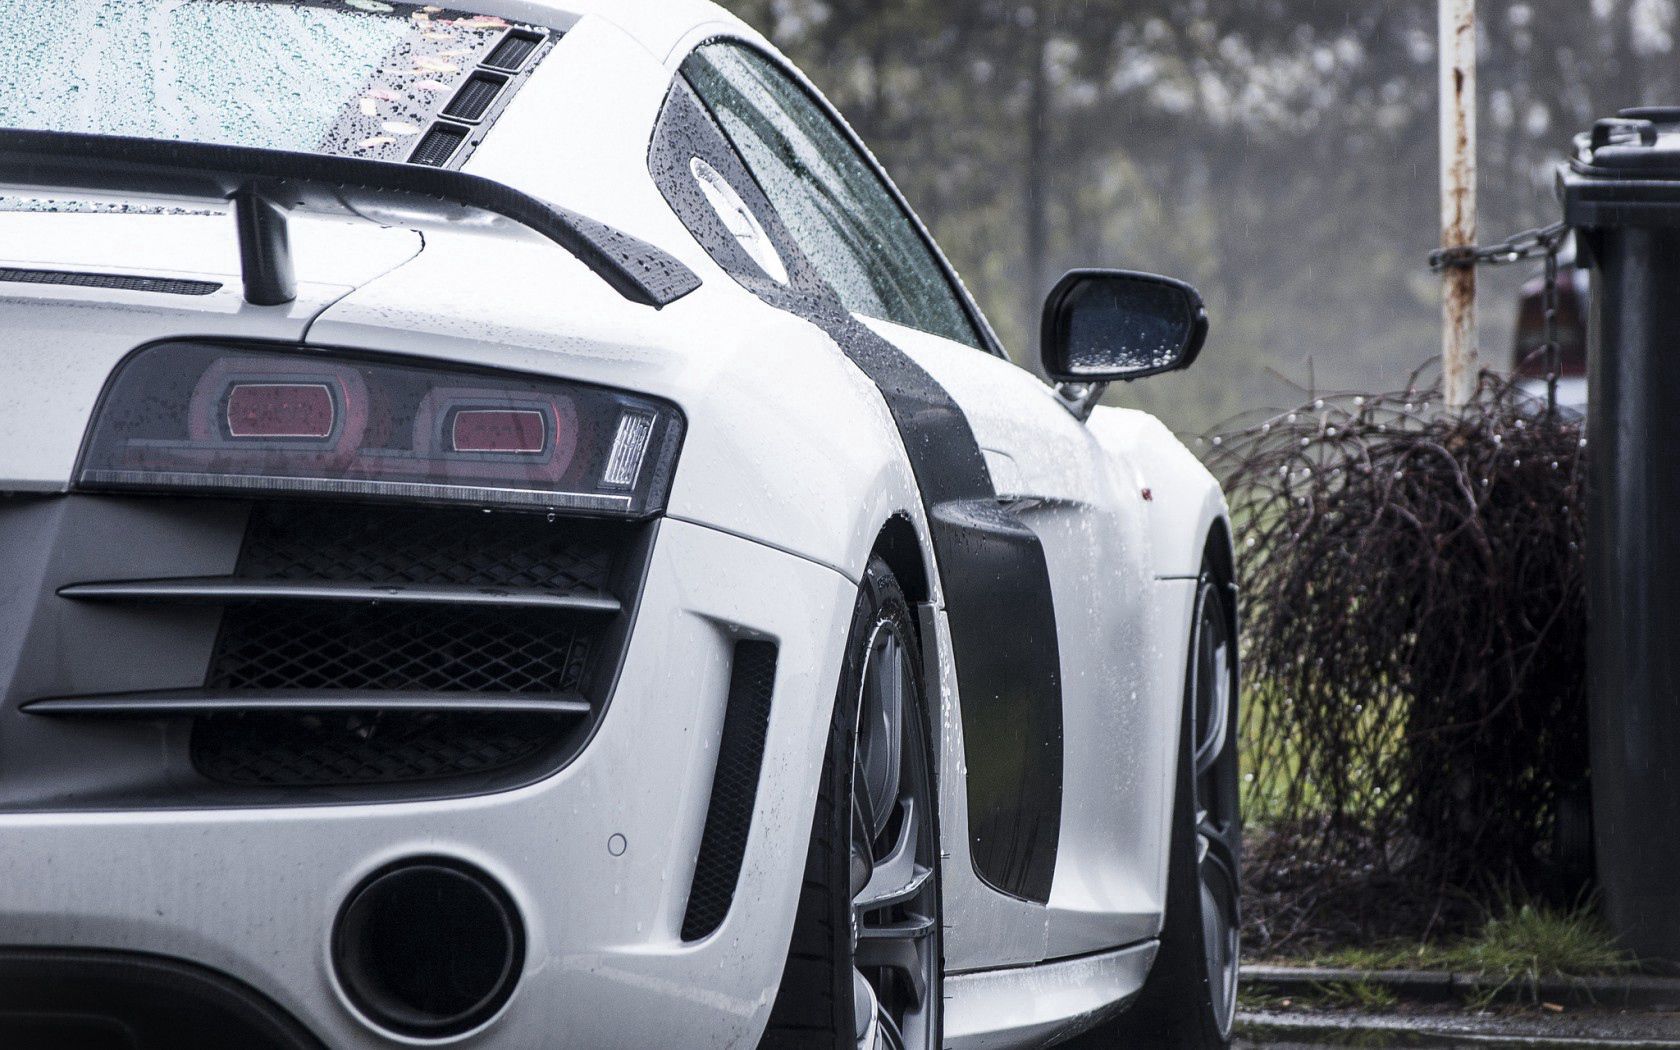 87653 download wallpaper rain, audi, cars, gt, silver, r8, rear bumper screensavers and pictures for free